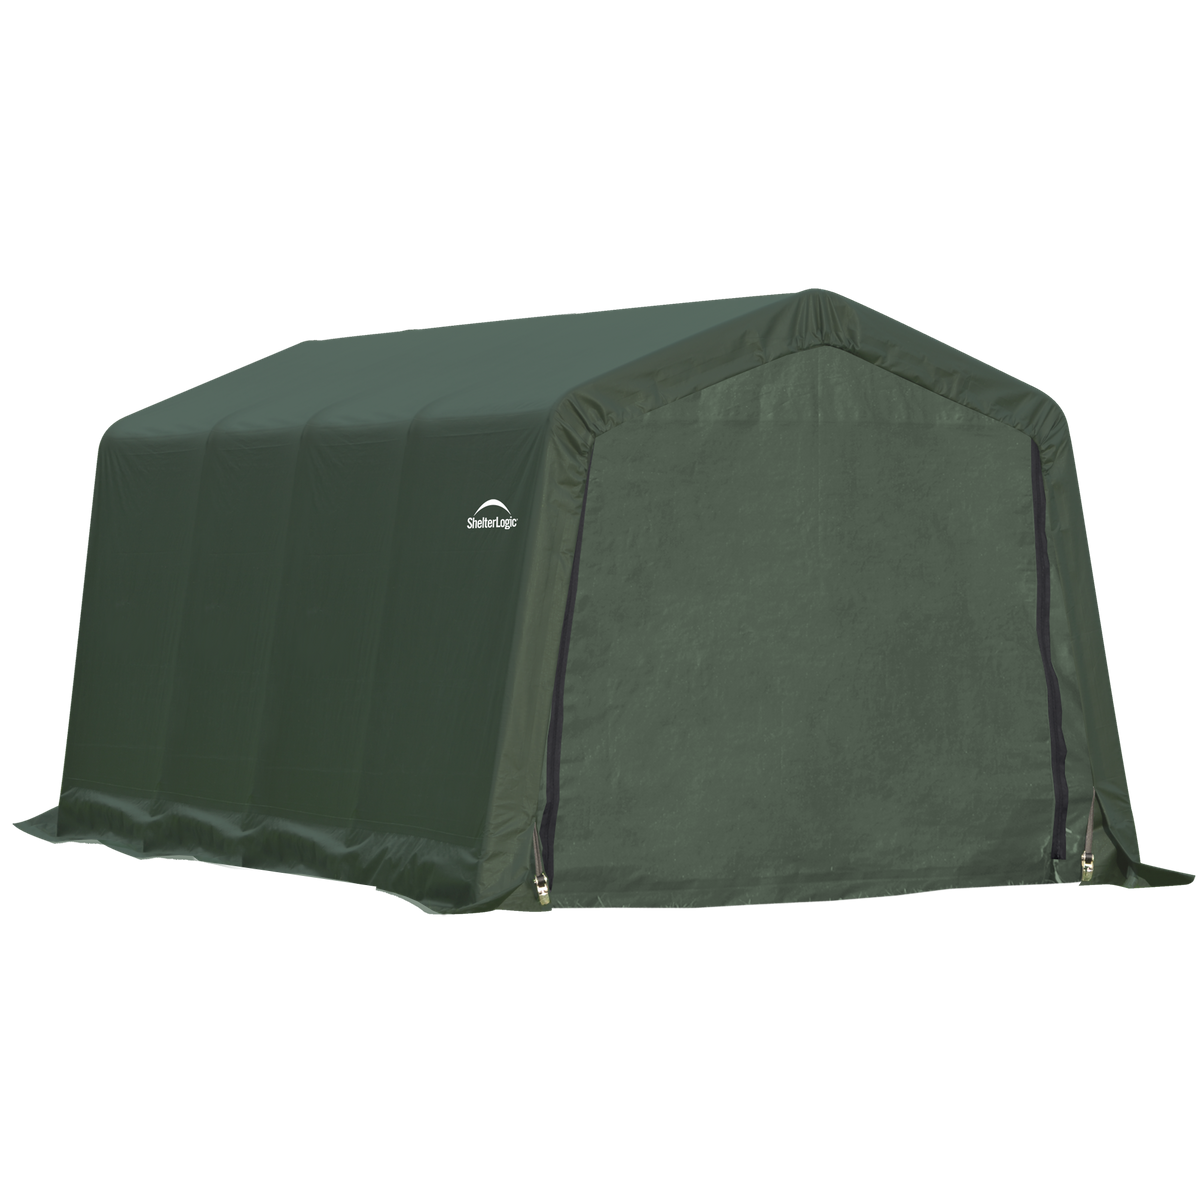 8x8x8 Round Shelter Green Colour